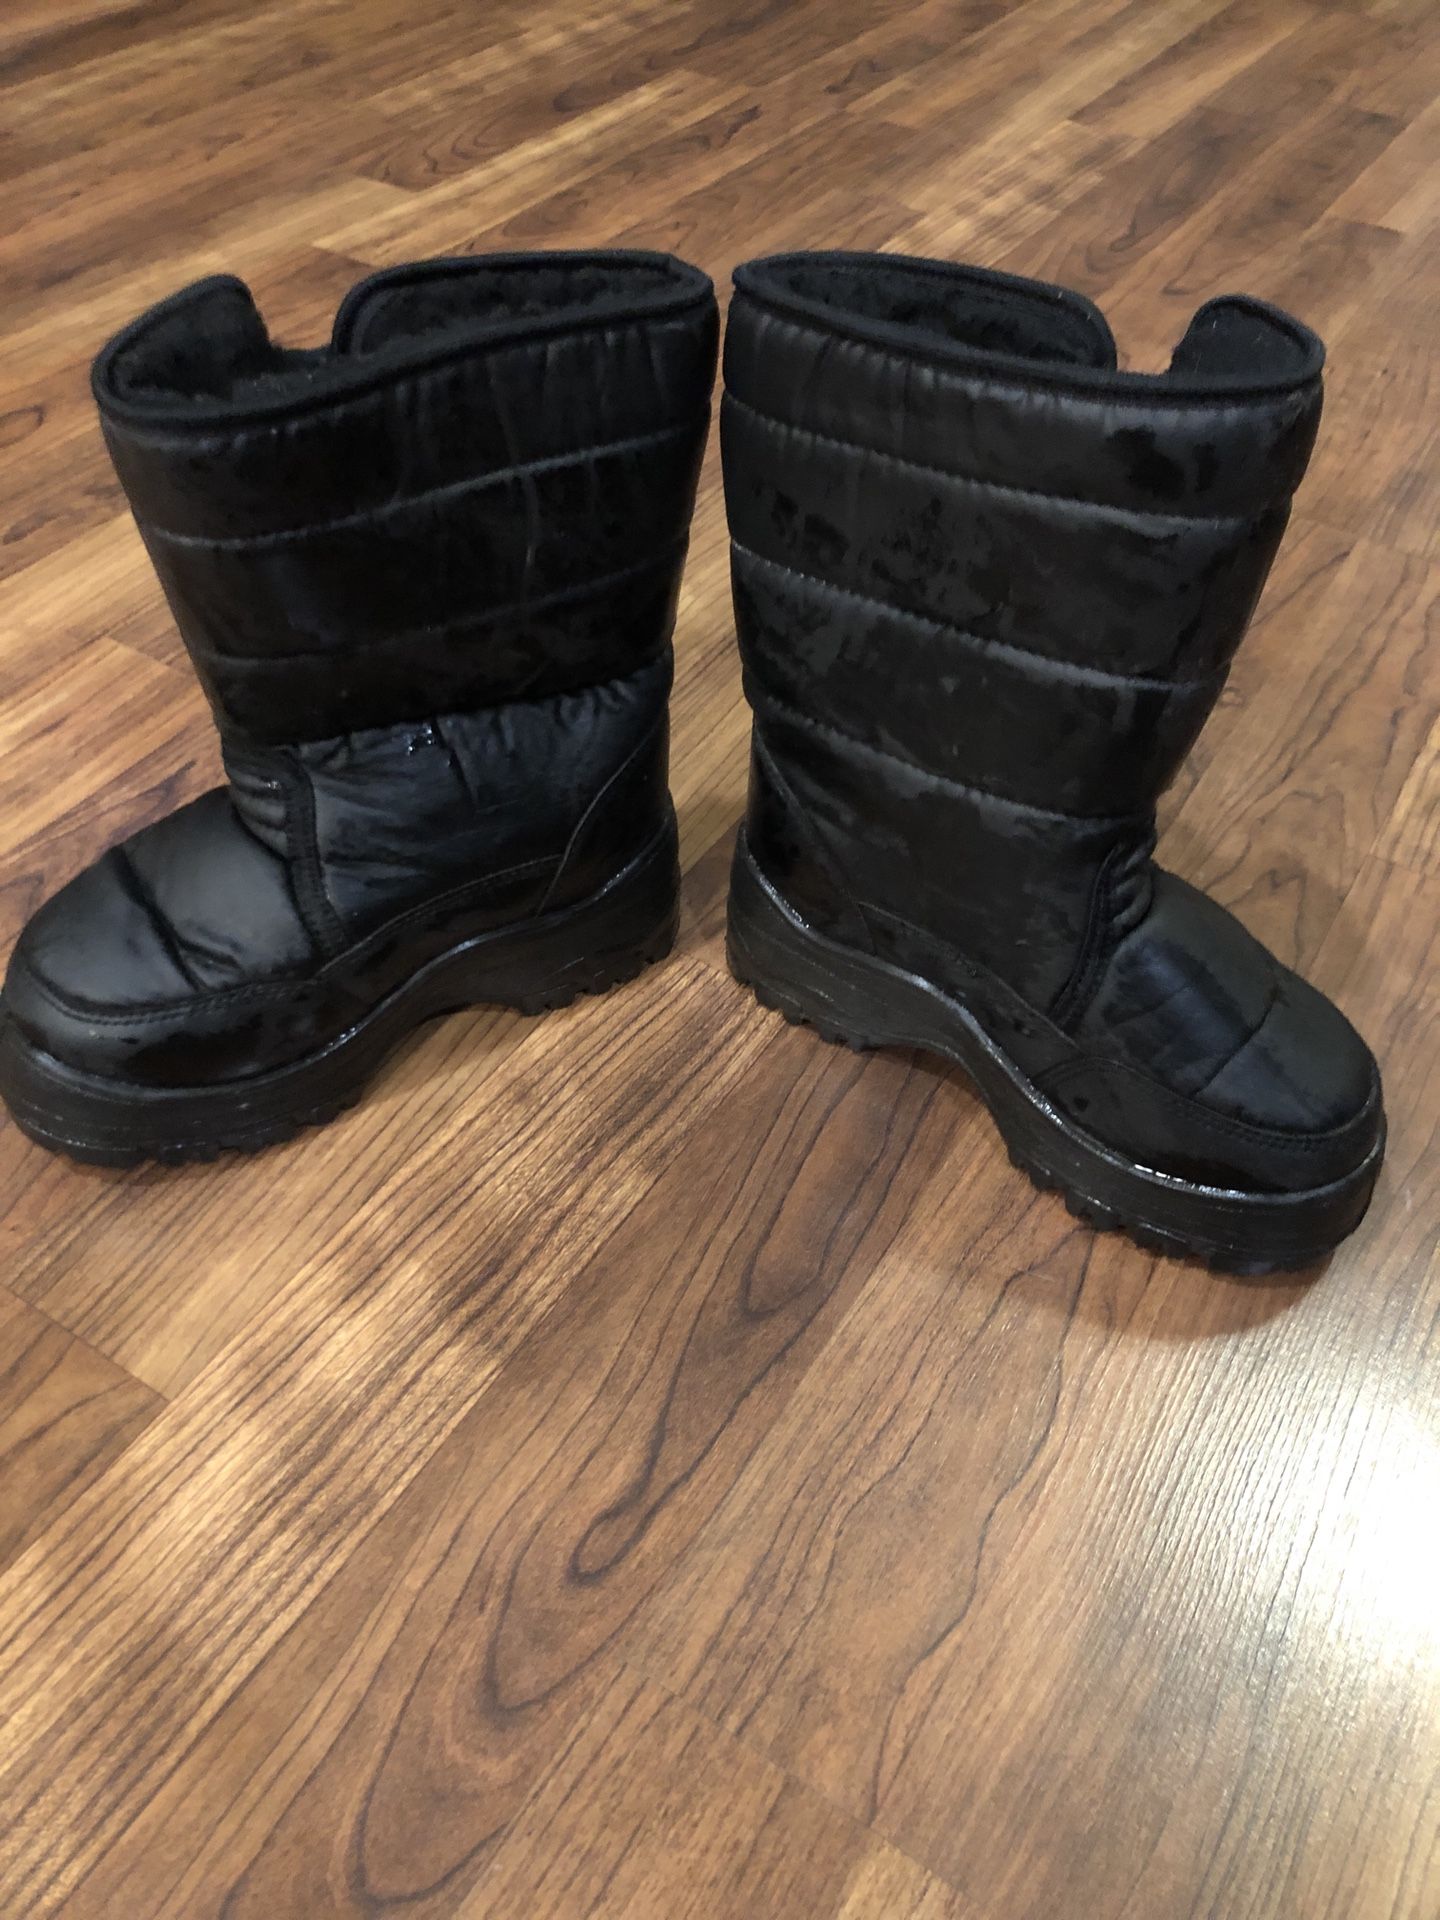 Toddler size 13 snow boots